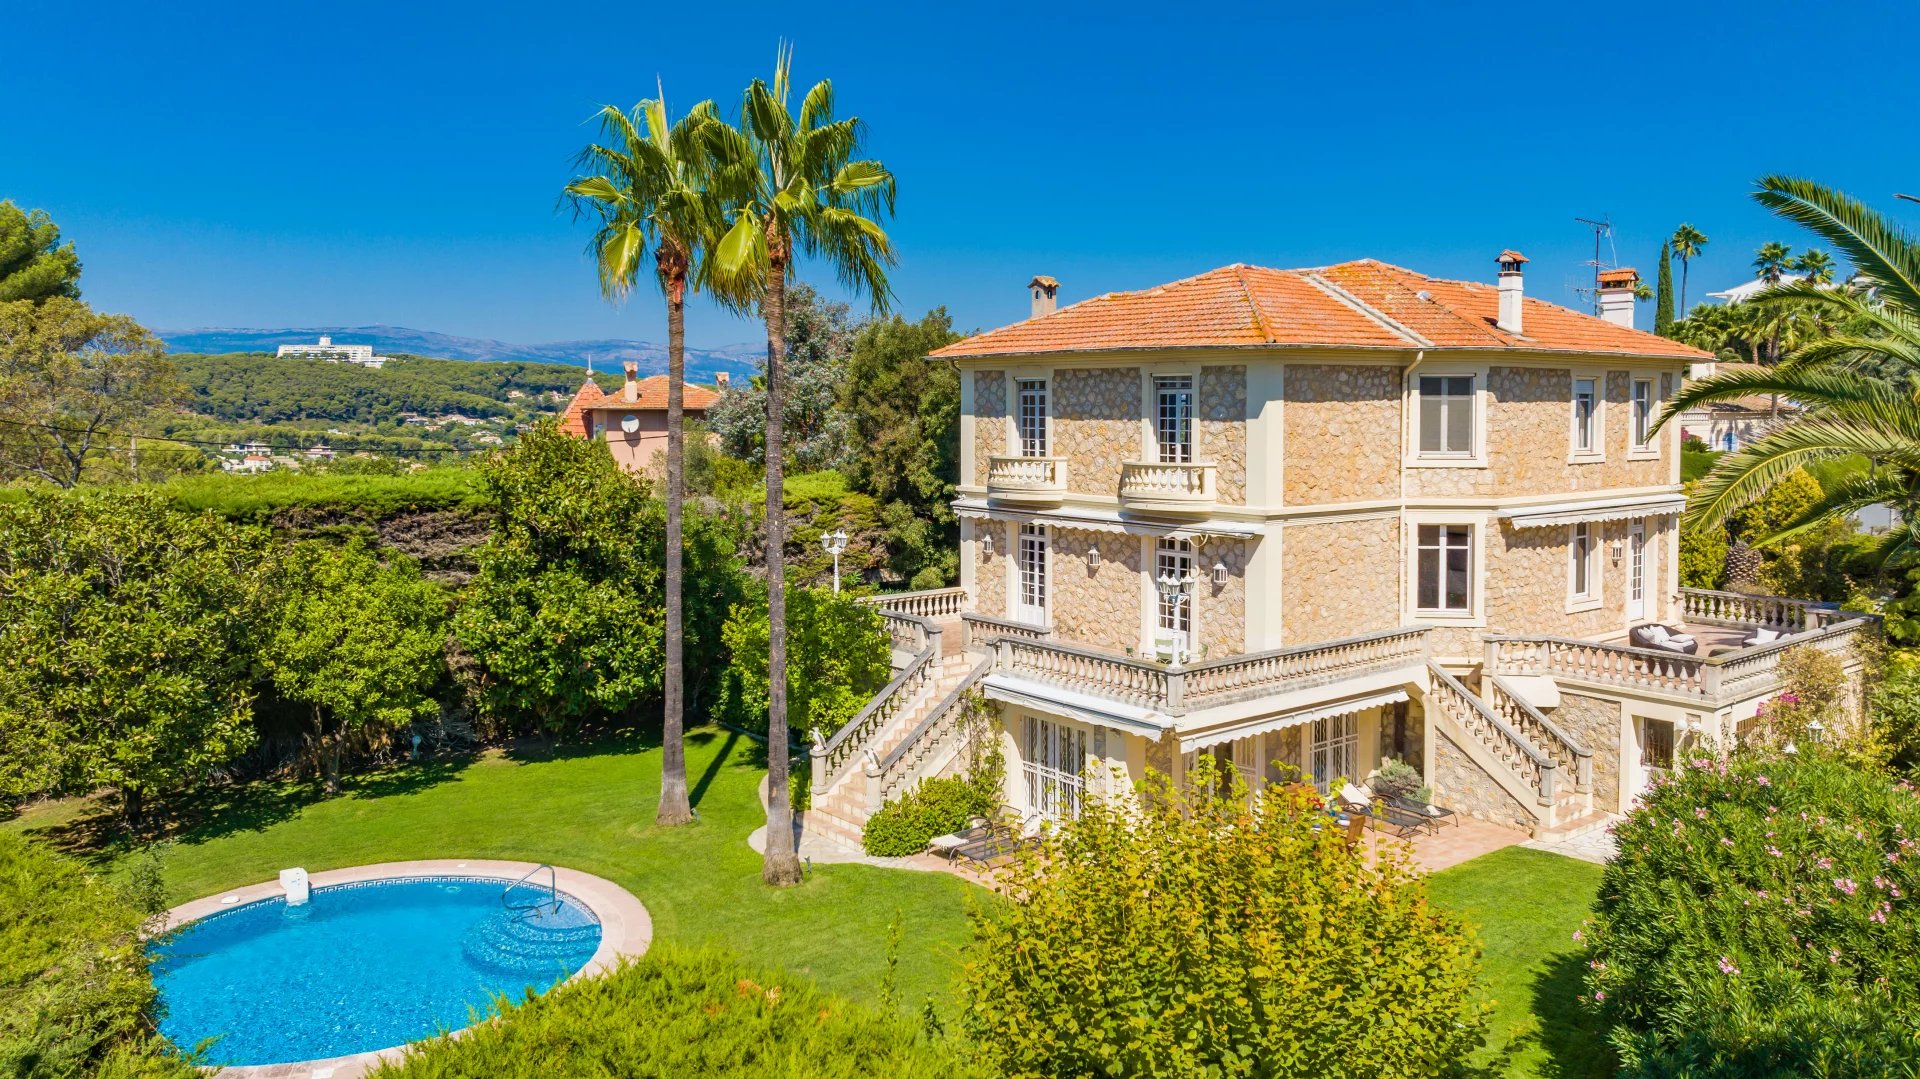 6 Bedroom Villa/House in Cannes 15